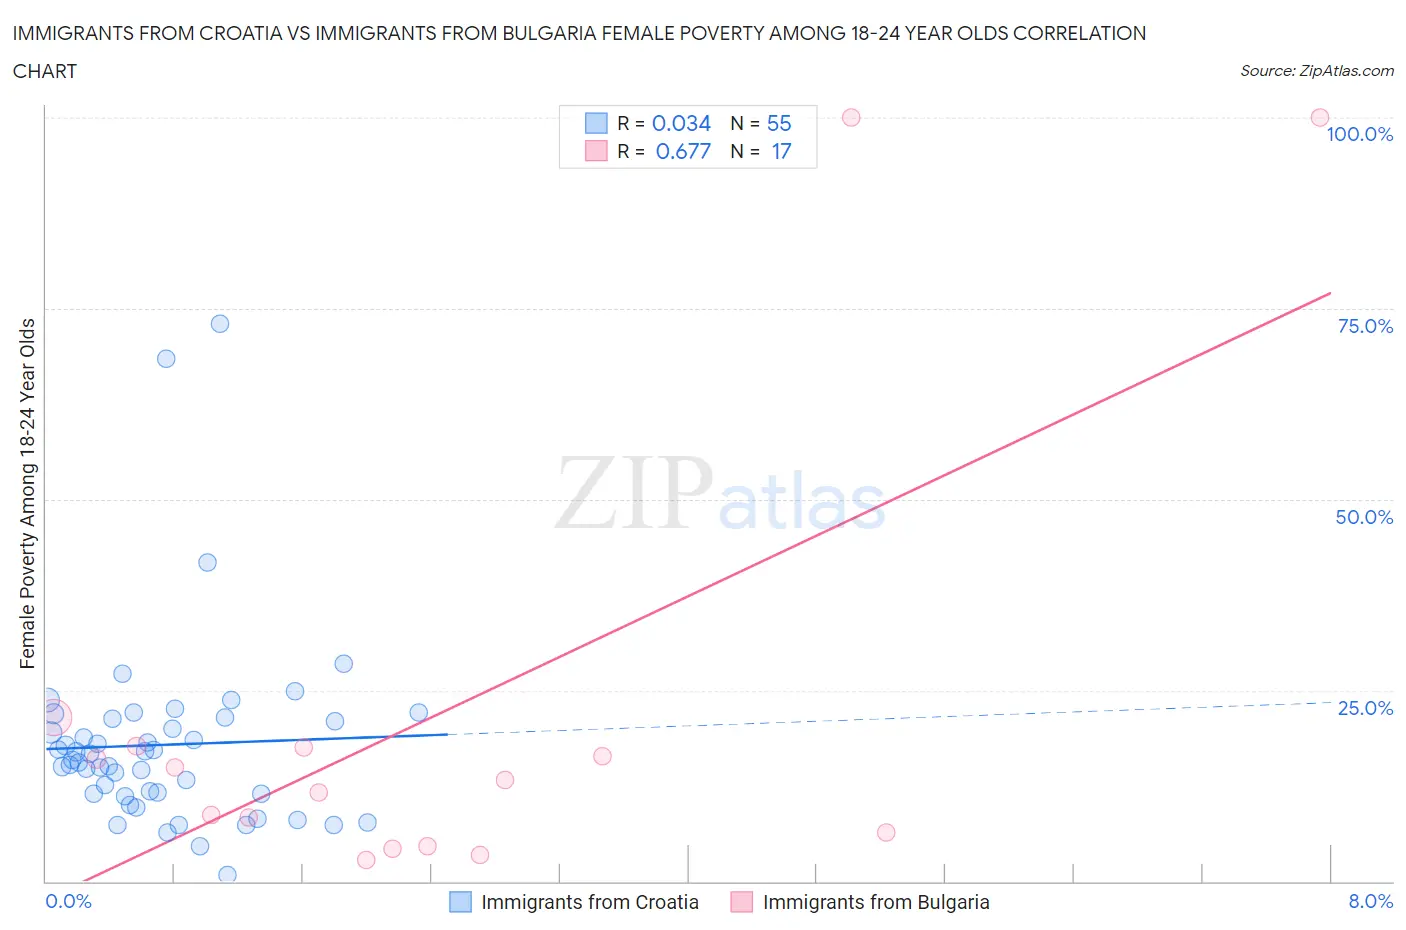 Immigrants from Croatia vs Immigrants from Bulgaria Female Poverty Among 18-24 Year Olds